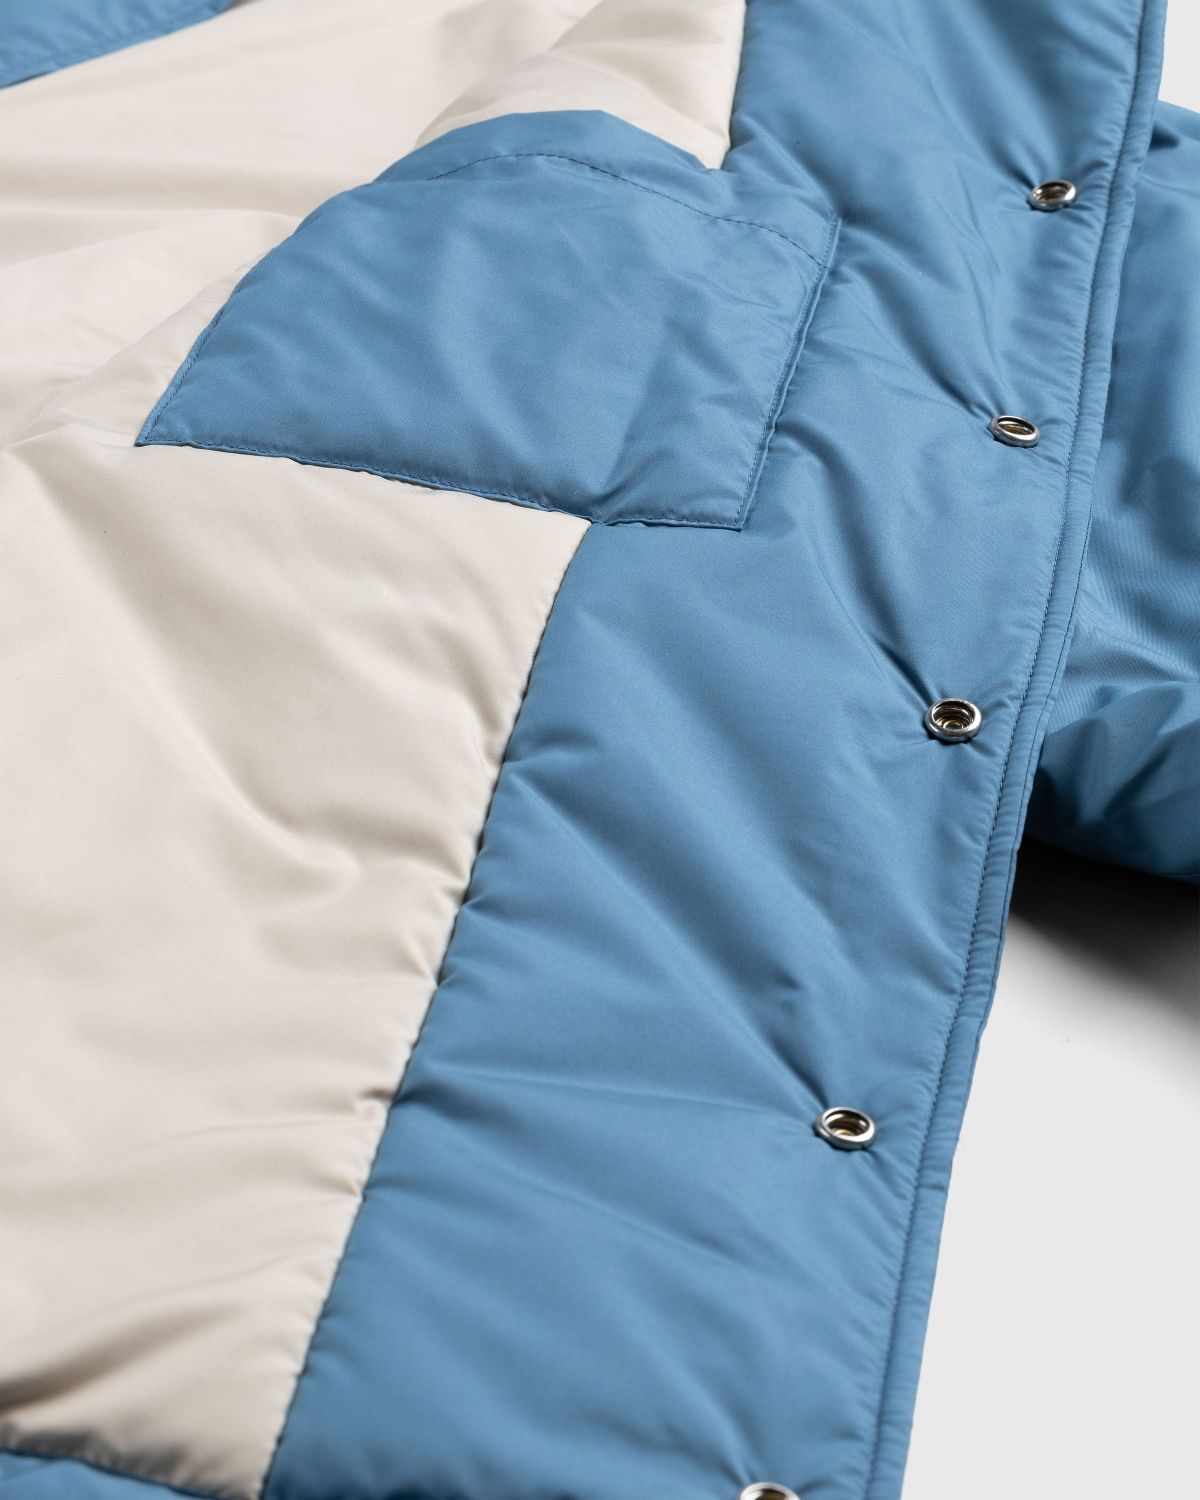 Highsnobiety HS05 – Light Insulated Eco-Poly Jacket Blue - Outerwear - Blue - Image 7